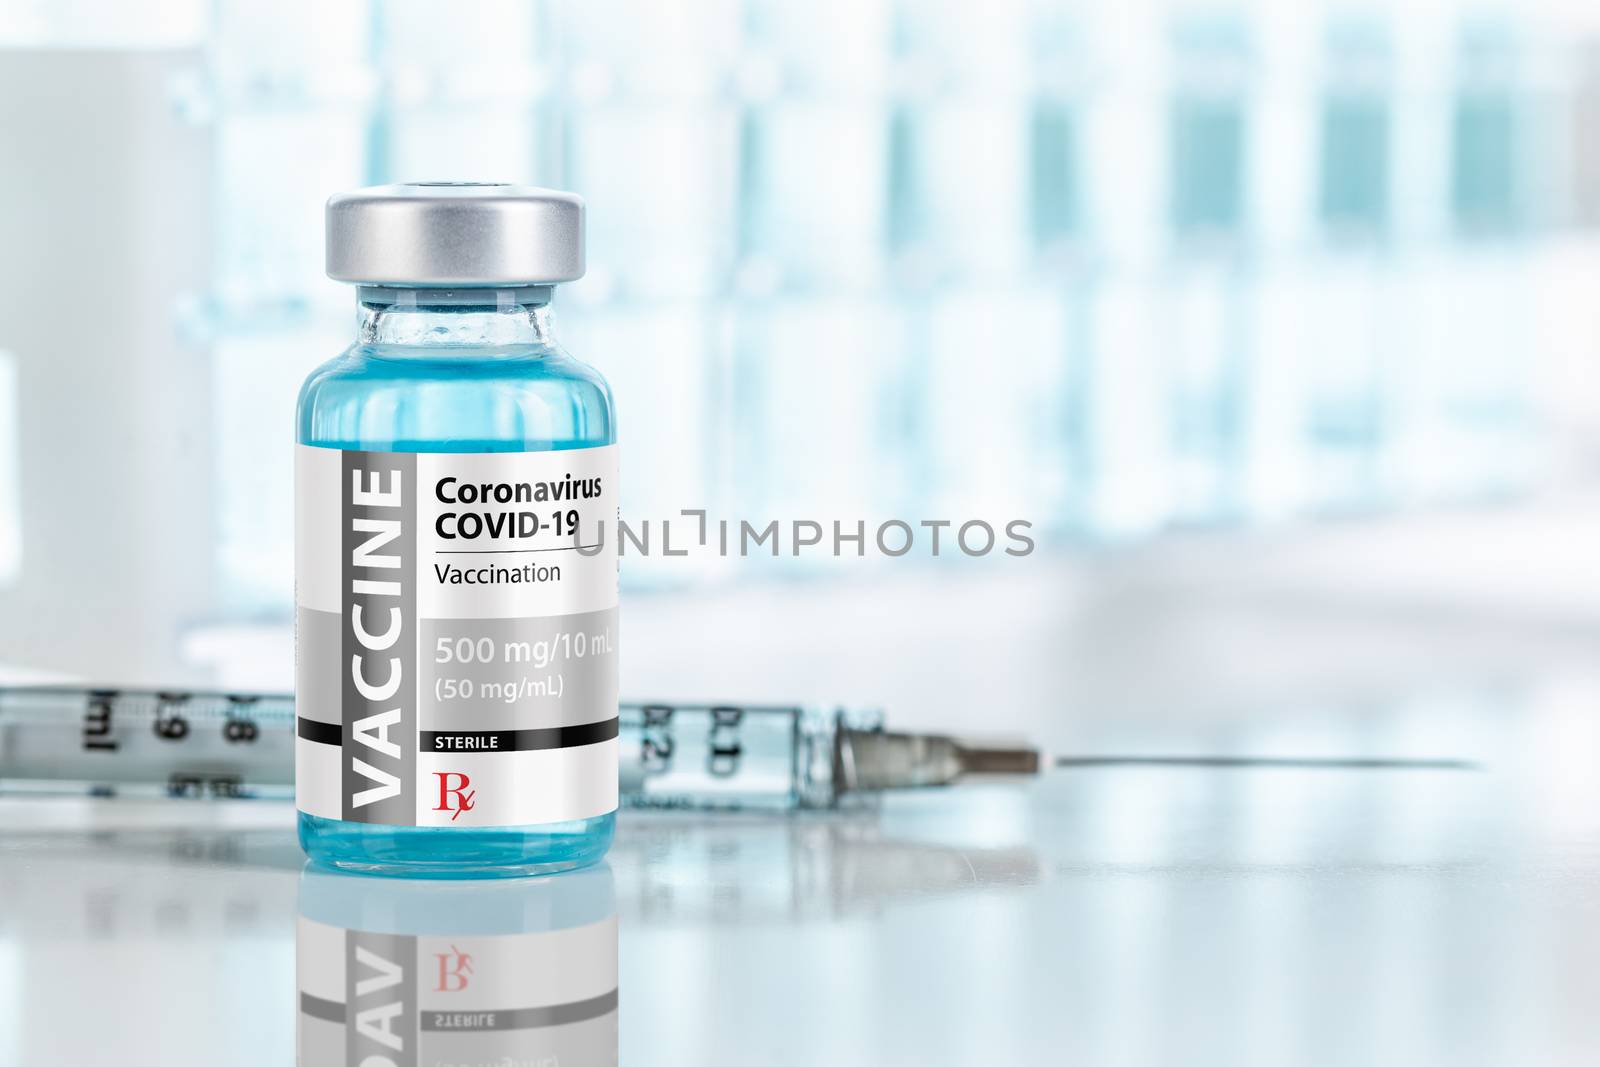 Coronavirus COVID-19 Vaccine Vial and Syringes On Reflective Sur by Feverpitched